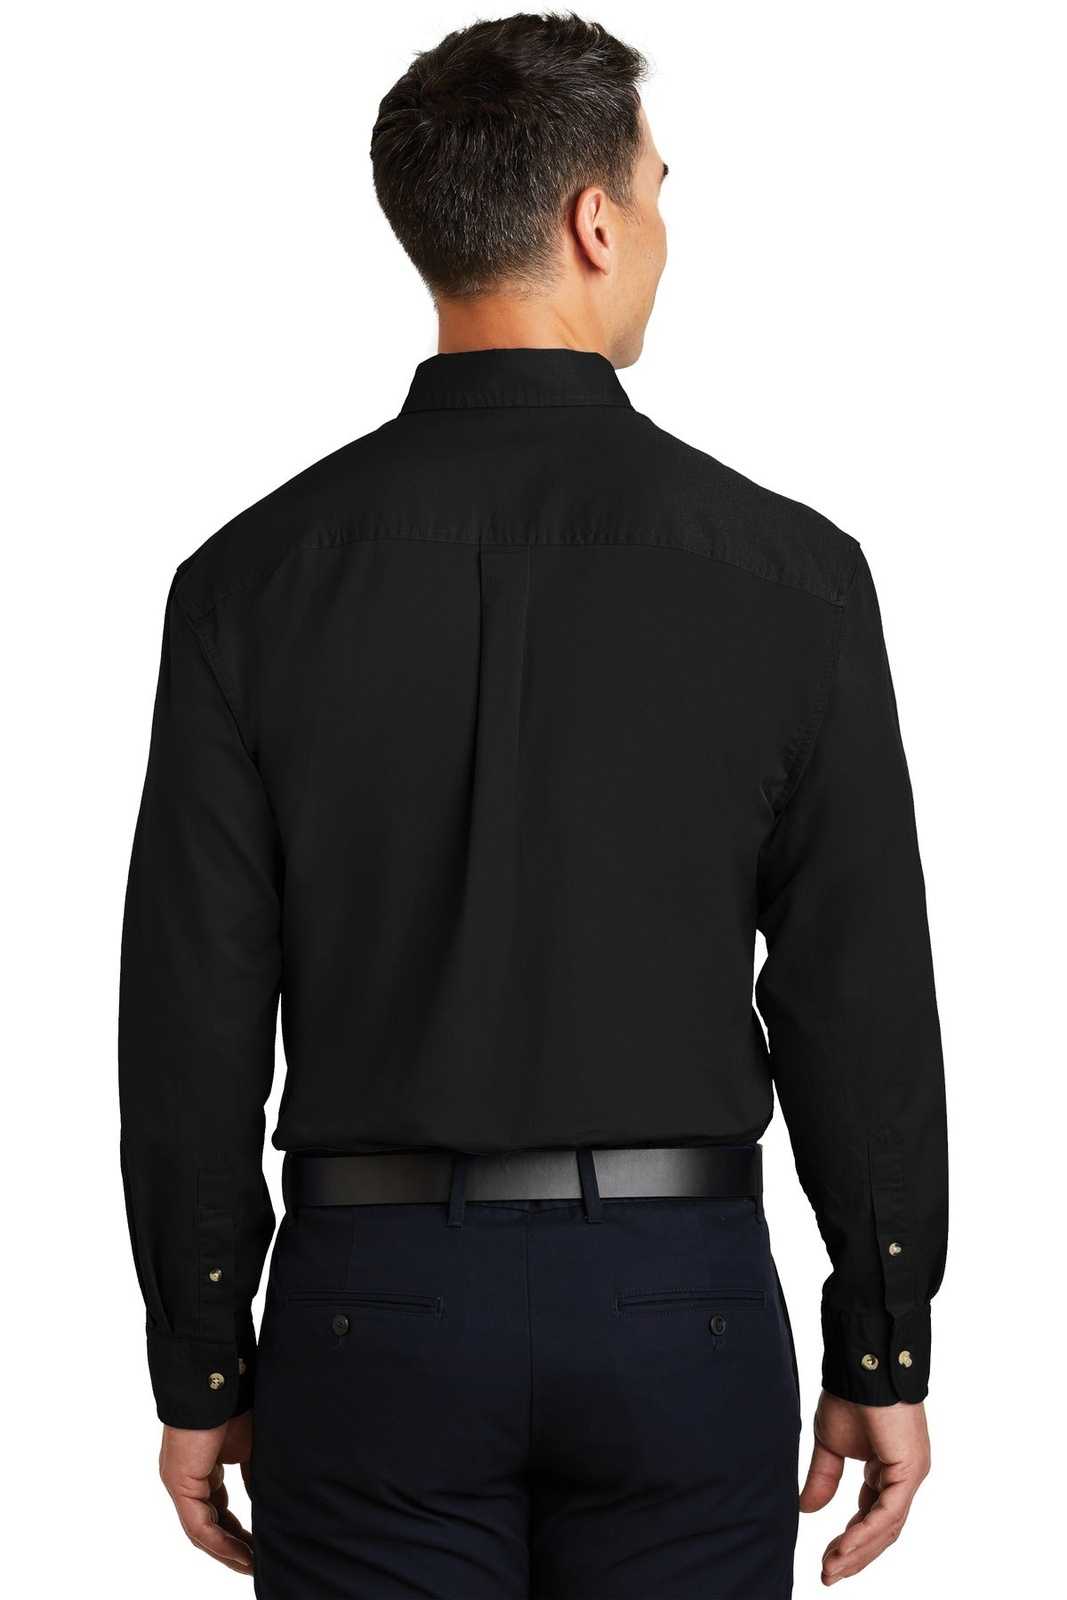 Port Authority S600T Long Sleeve Twill Shirt - Black - HIT a Double - 2